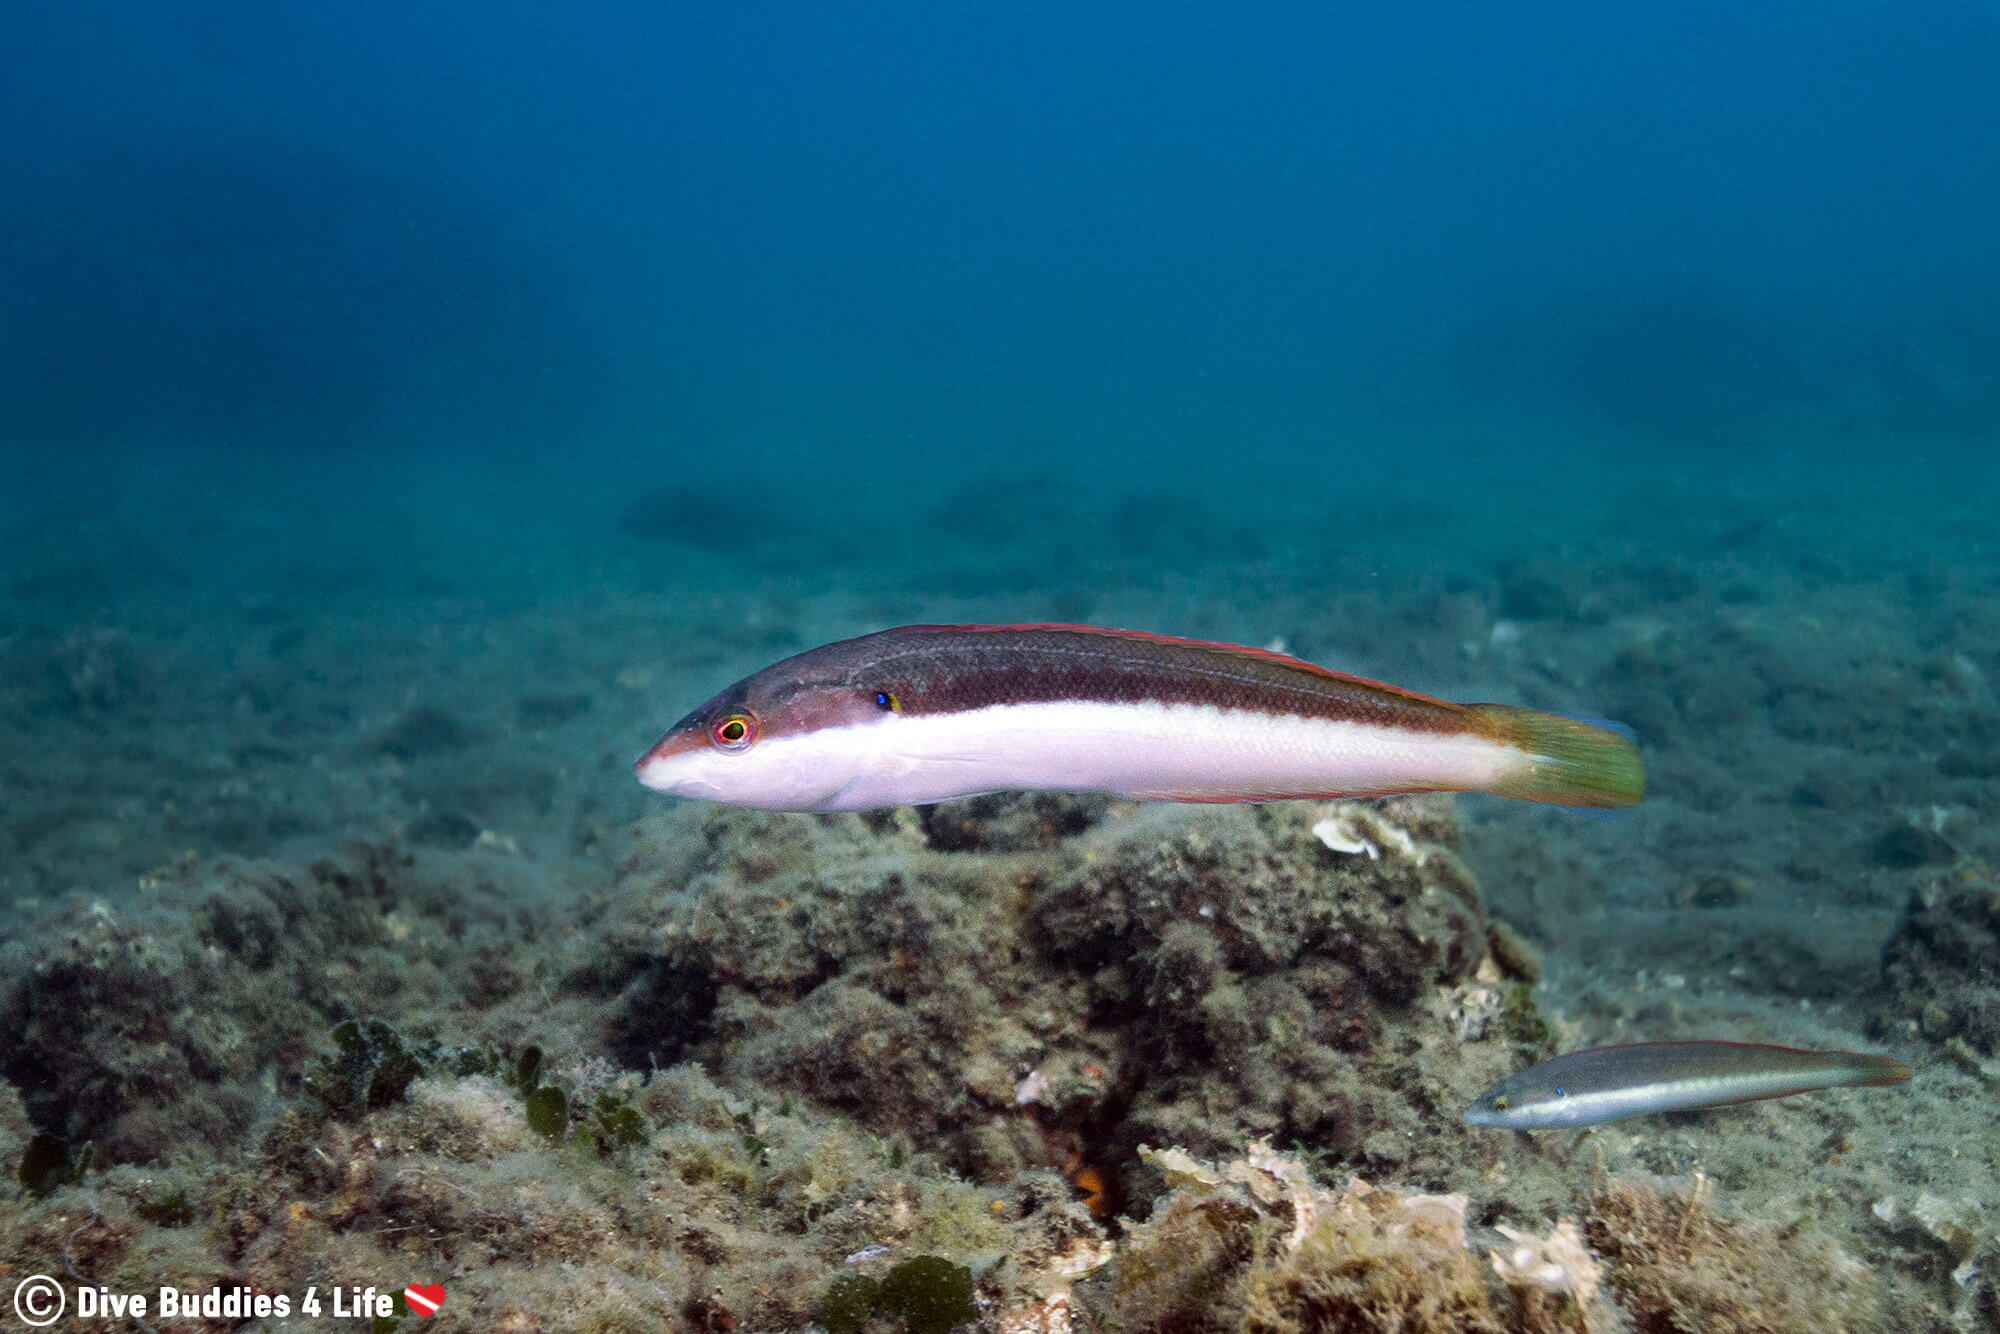 A Wrasse Swimming Underwater At The Baiae Scuba Diving Archeological Site In Naples, Italy, Europe